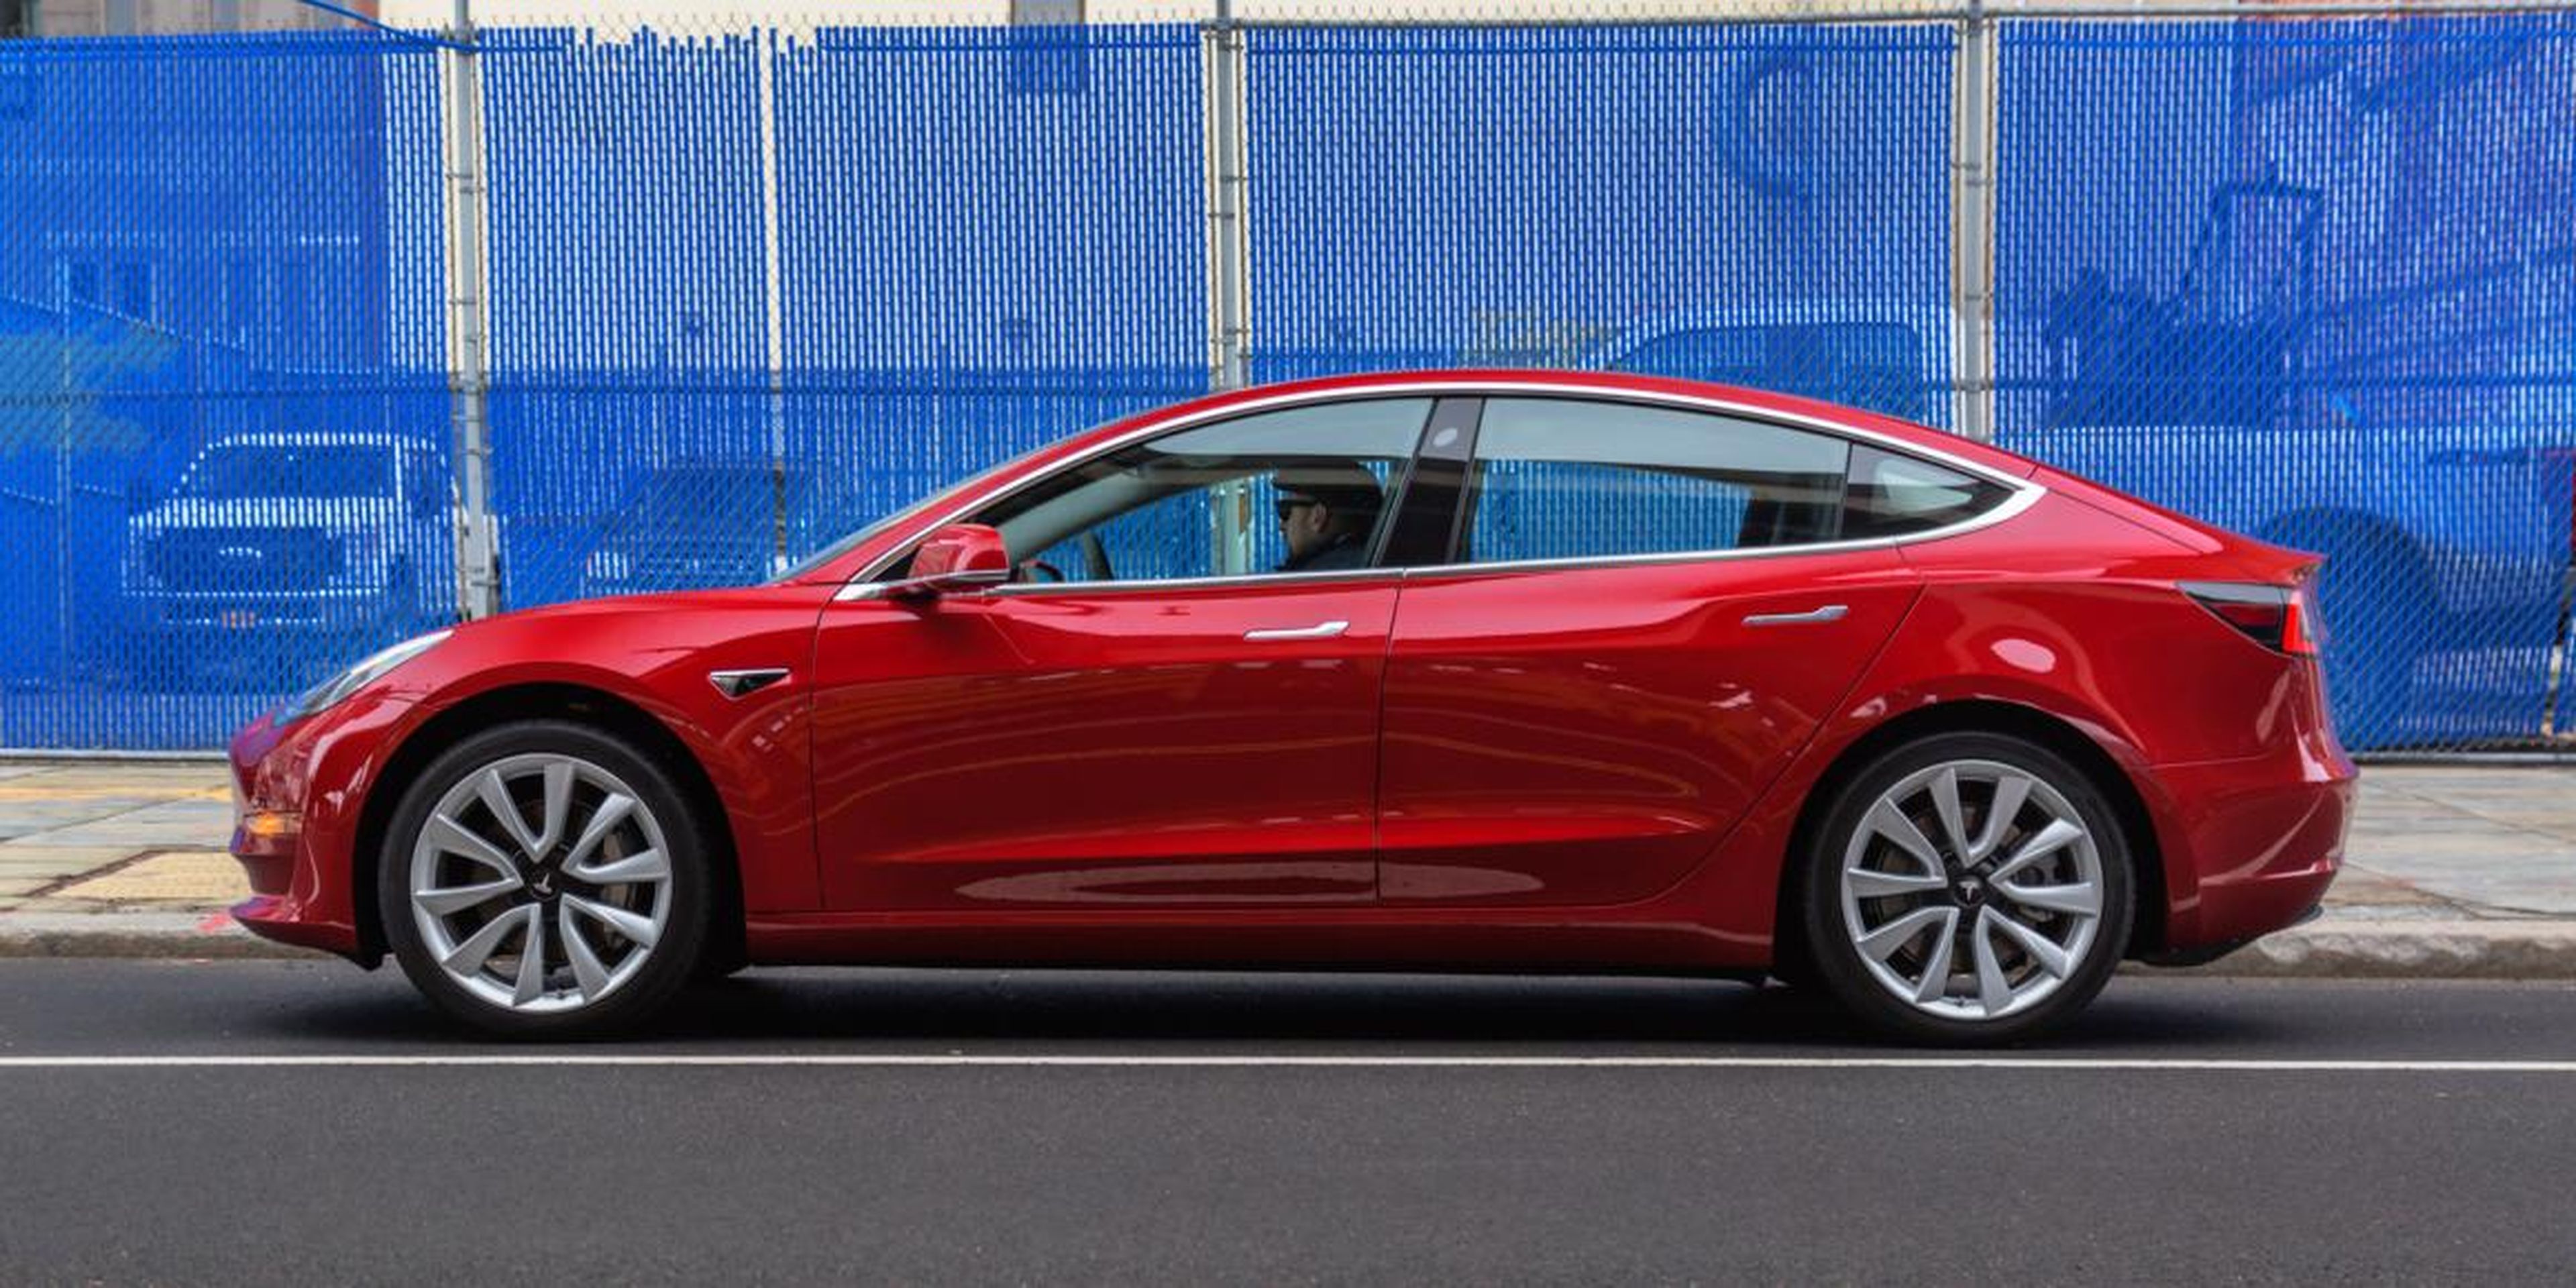 7. The standard Model 3 comes with 18-inch or 19-inch sport wheels from Tesla. The Model 3 Performance can be upgraded to 20-inch "performance" wheels that have better grip. Larger tires also tend to increase a car's gas mileage.